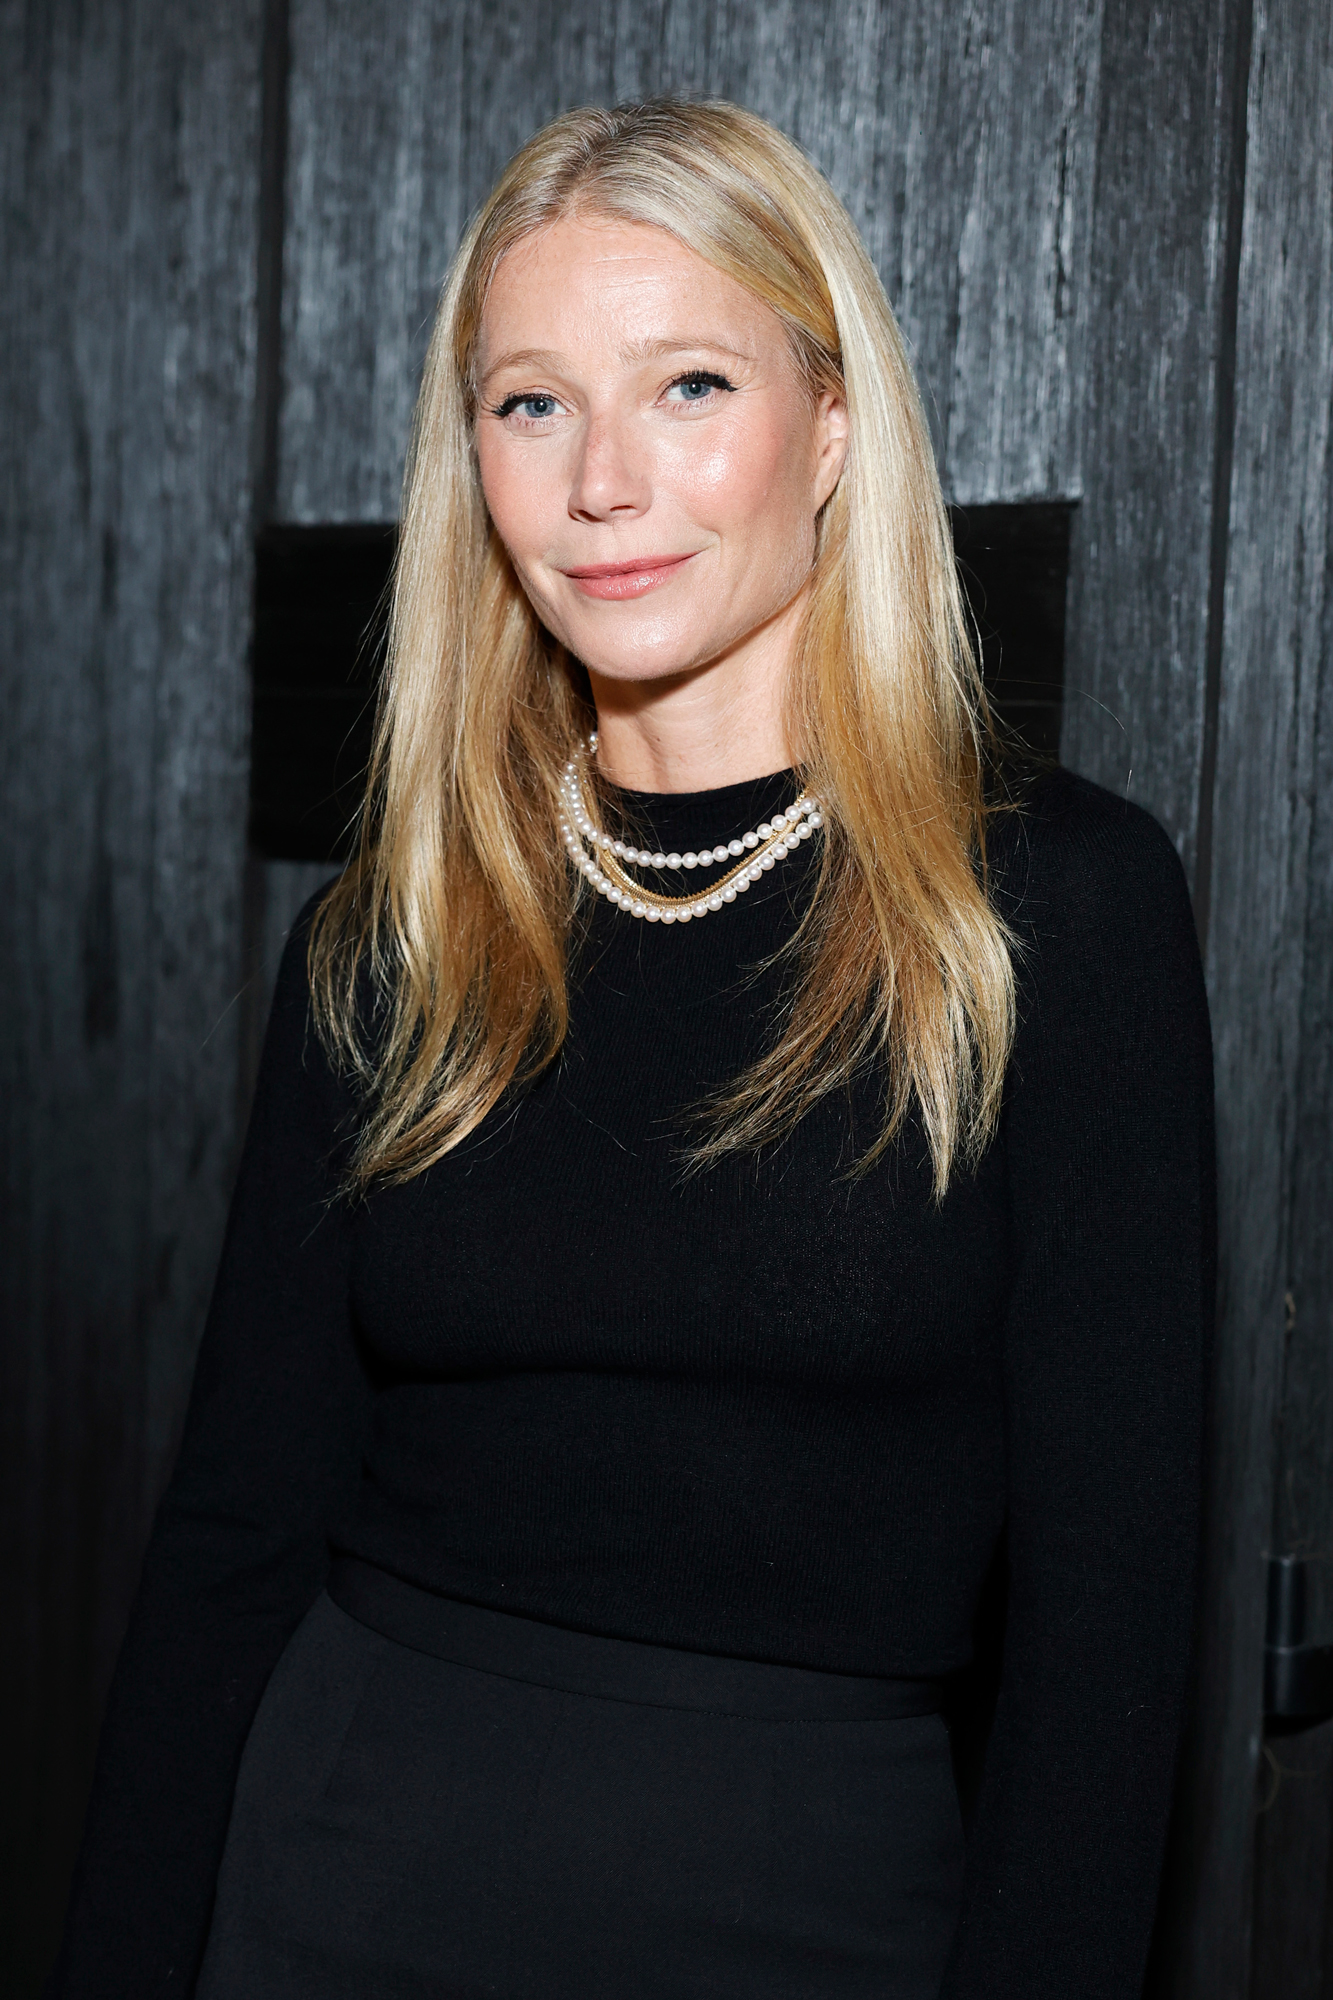 Gwyneth Paltrow Couldn’t Be in a ‘Poly Relationship’: ‘Not for Me’